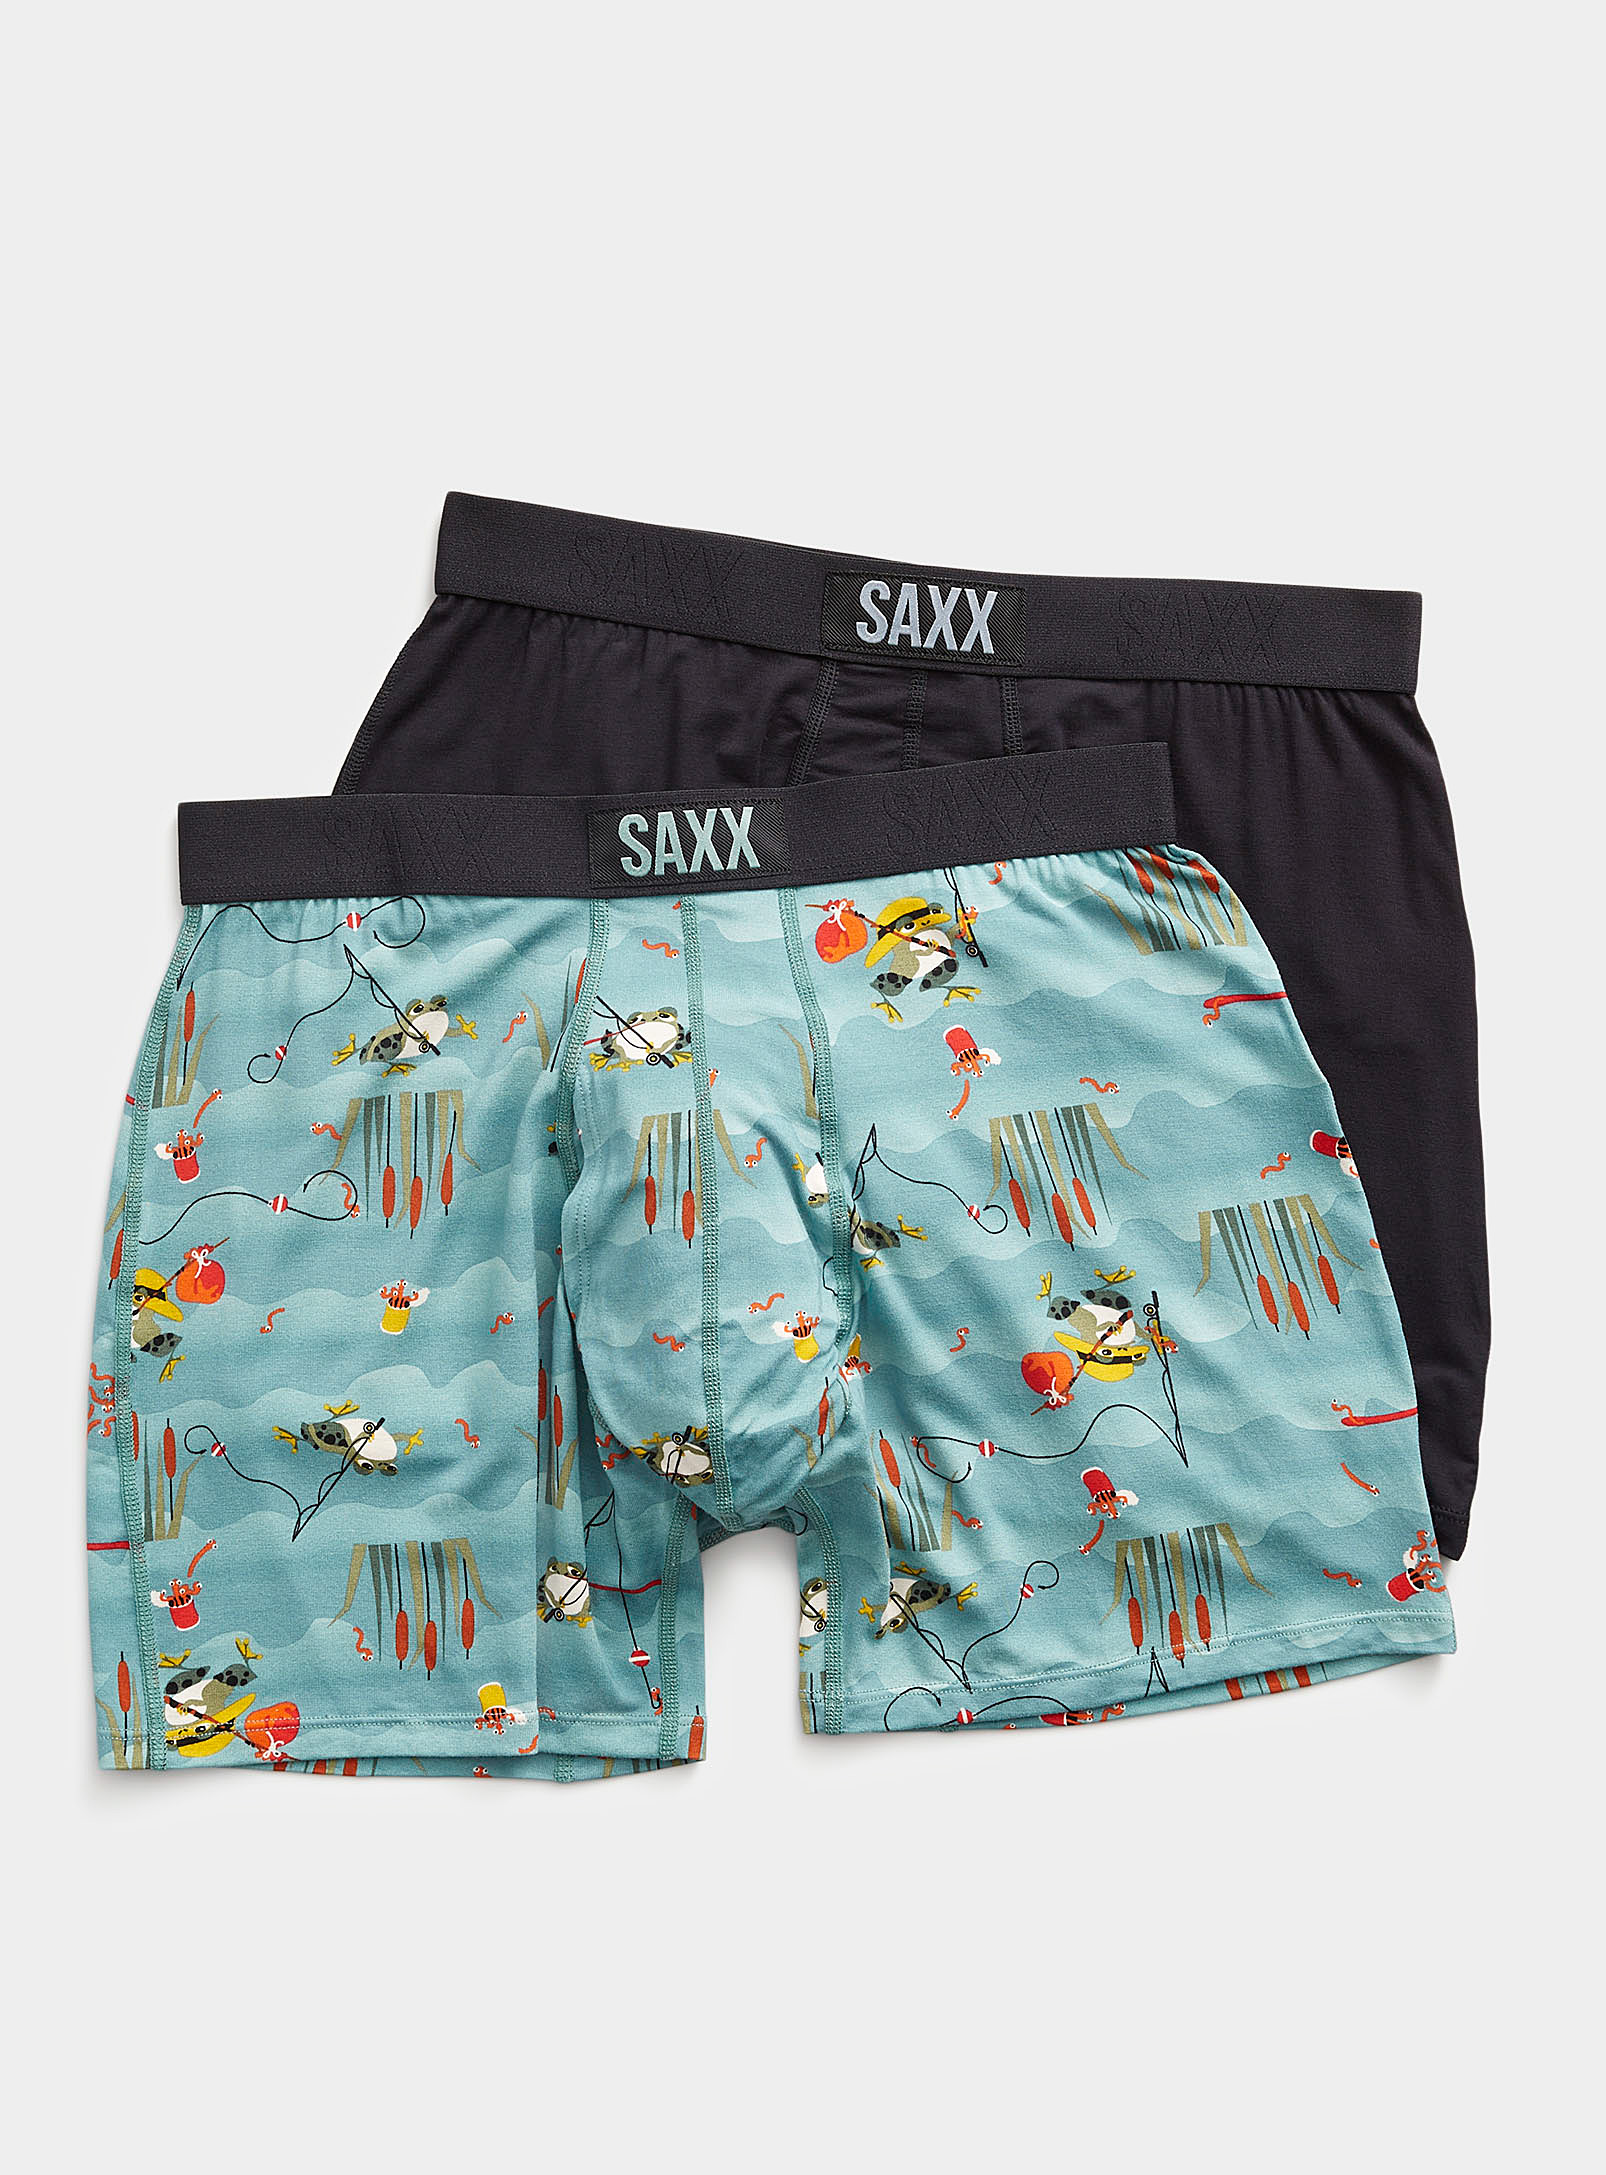 Saxx 2-pack In Patterned Blue